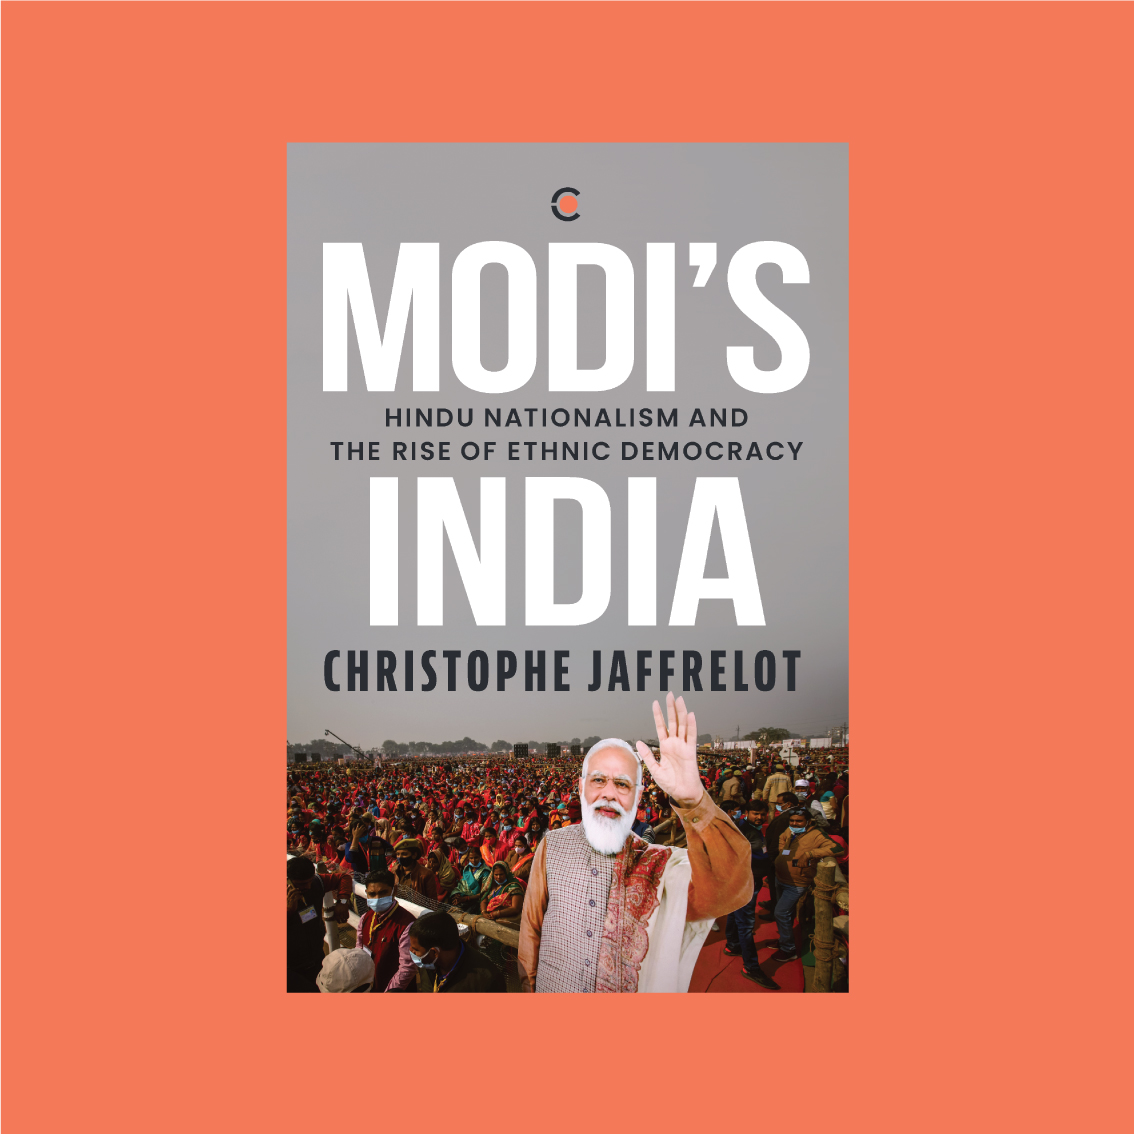 #ReadandElect @jaffrelotc's Modi's India is a detailed and comprehensive analysis of the BJP's rise under Modi’s leadership. Read the book to understand how #BJP has moved India towards an ethnic democracy. @ContextIndia #Elections2024 #LokSabhaElection2024 #Vote